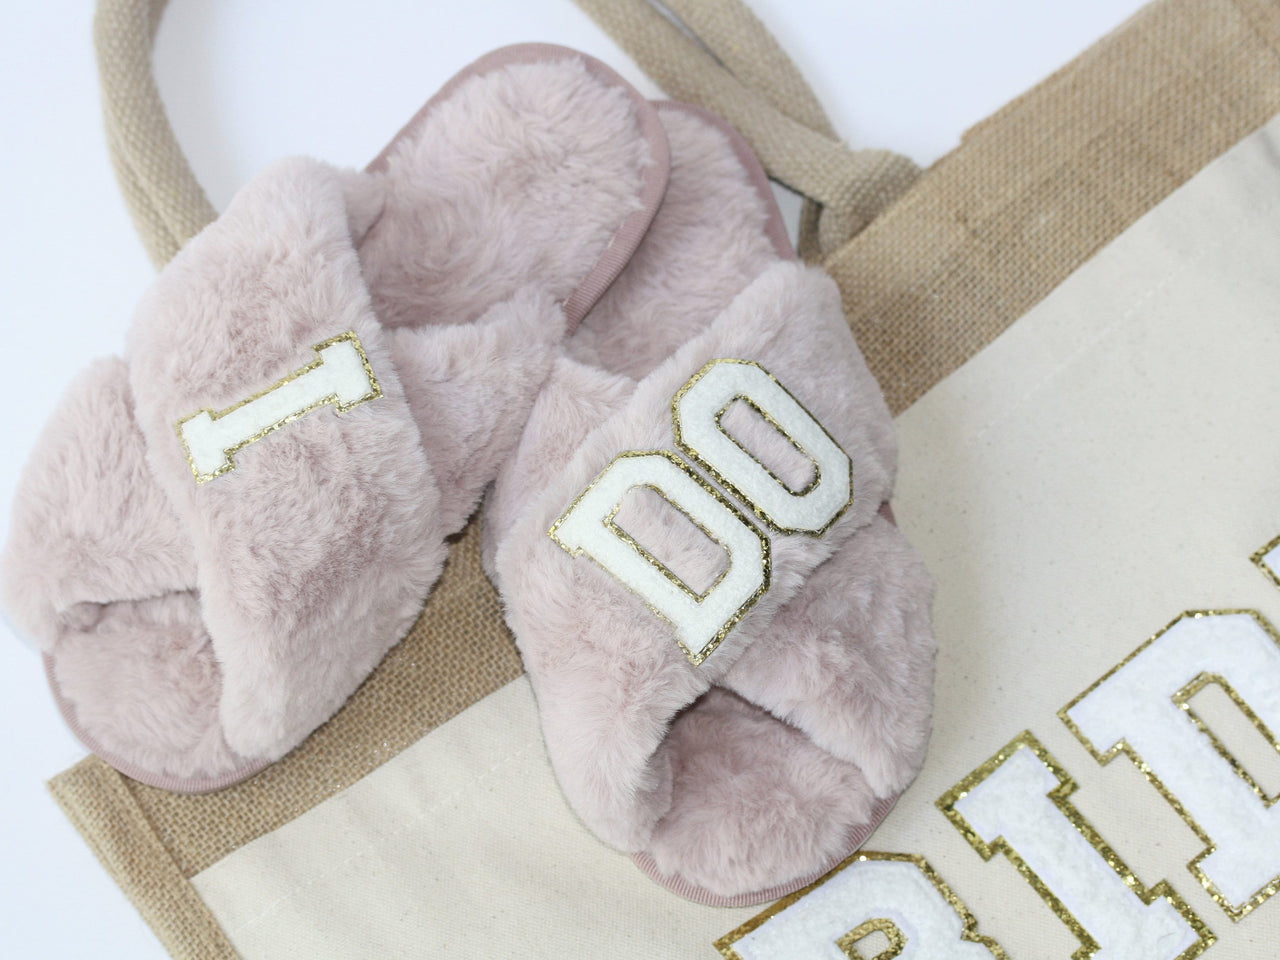 Bride Slippers, Bridesmaid slippers, Bridal slippers, custom slippers, fluffy slippers with Pearl patch, Wedding set, bridesmaid gifts